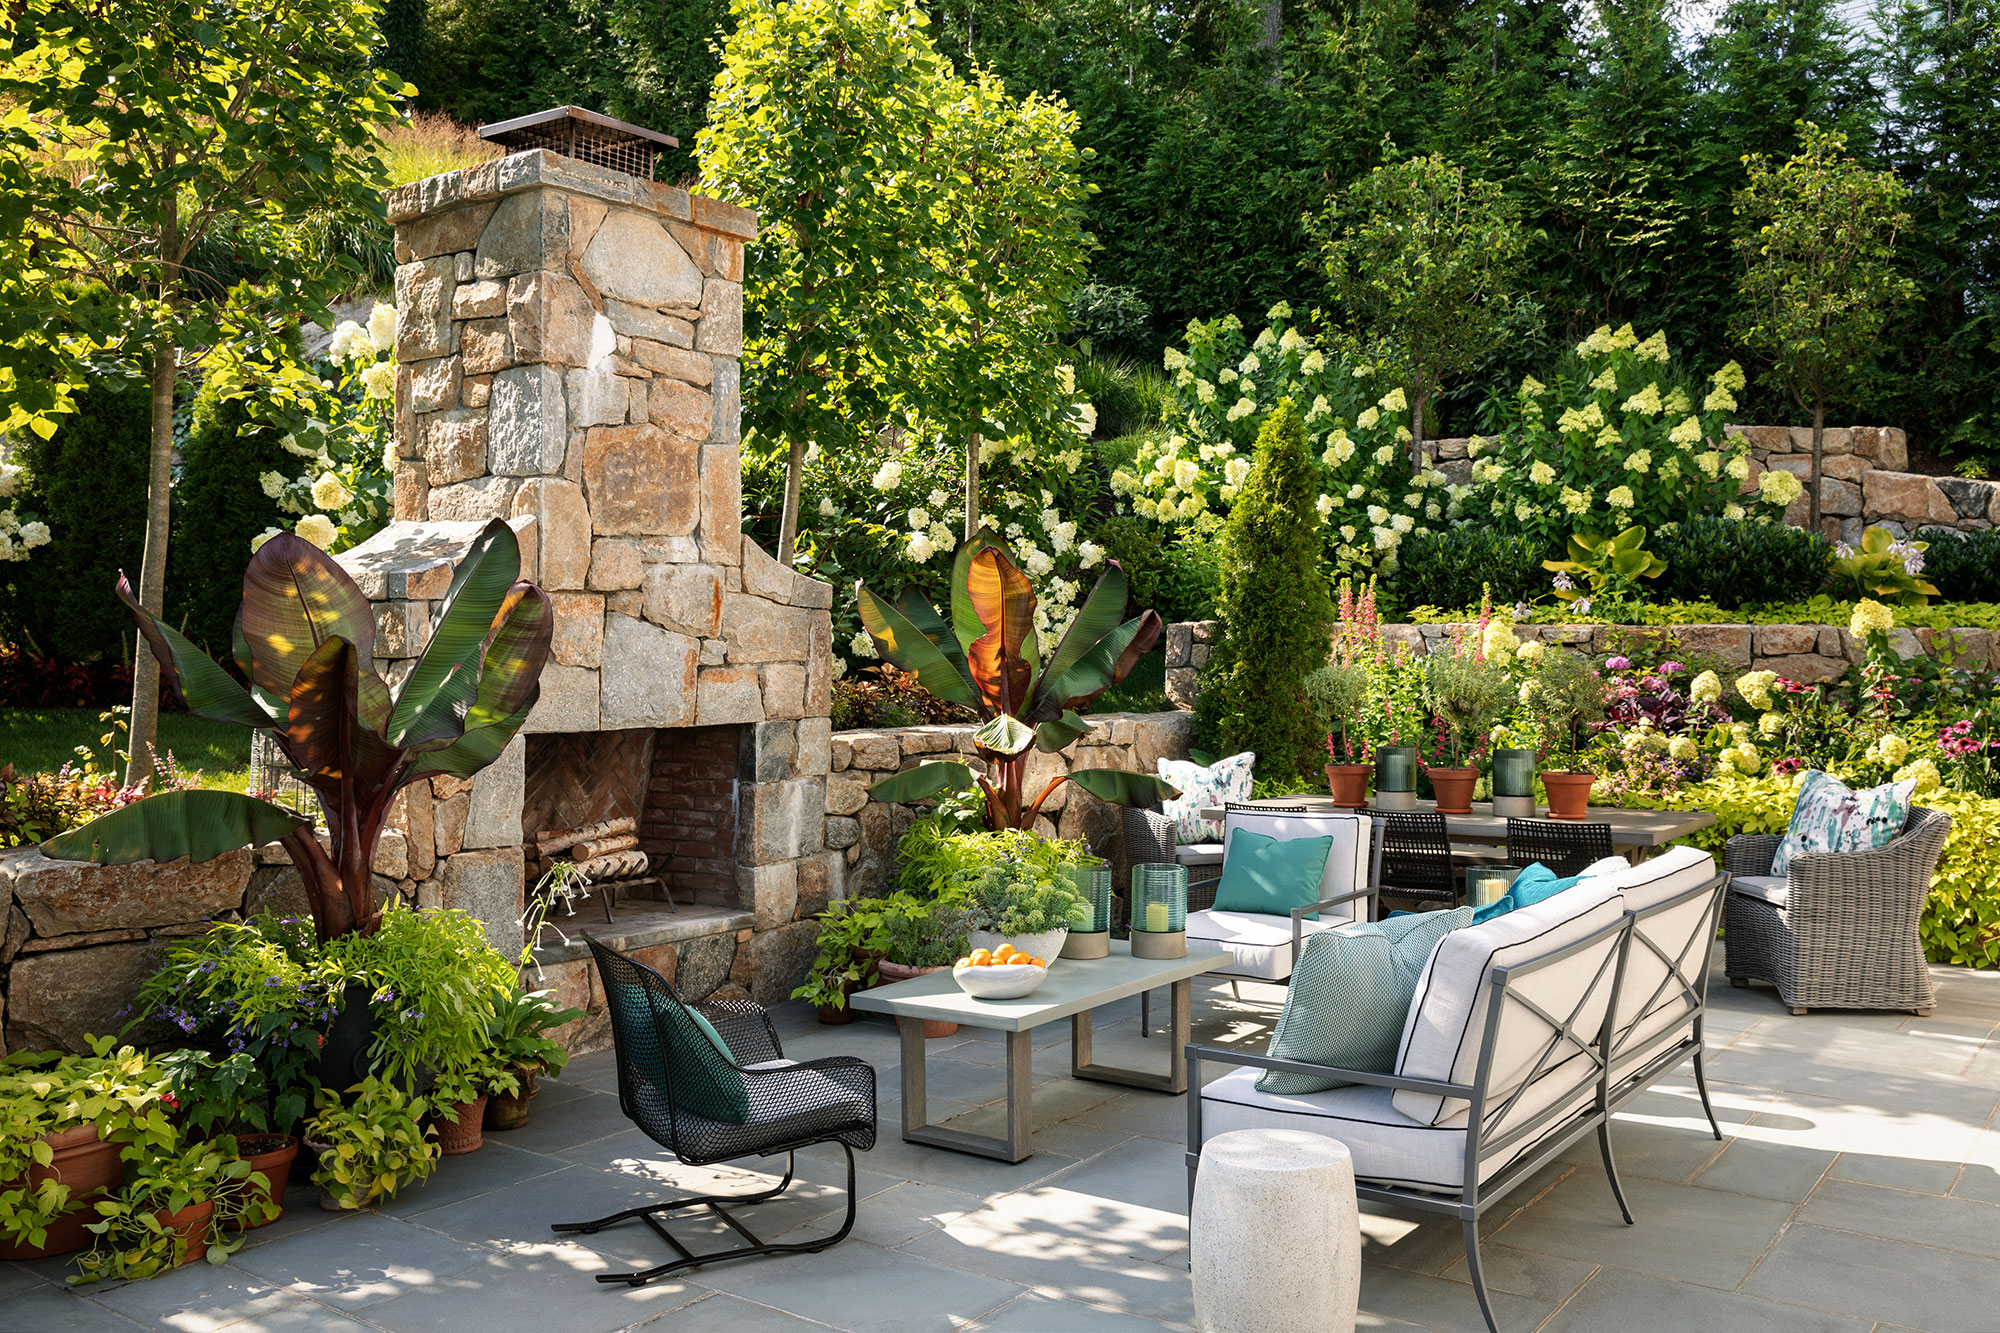 Colorful, inviting outdoor seating group in front of a stone fireplace and beside a large table topped with potted plants